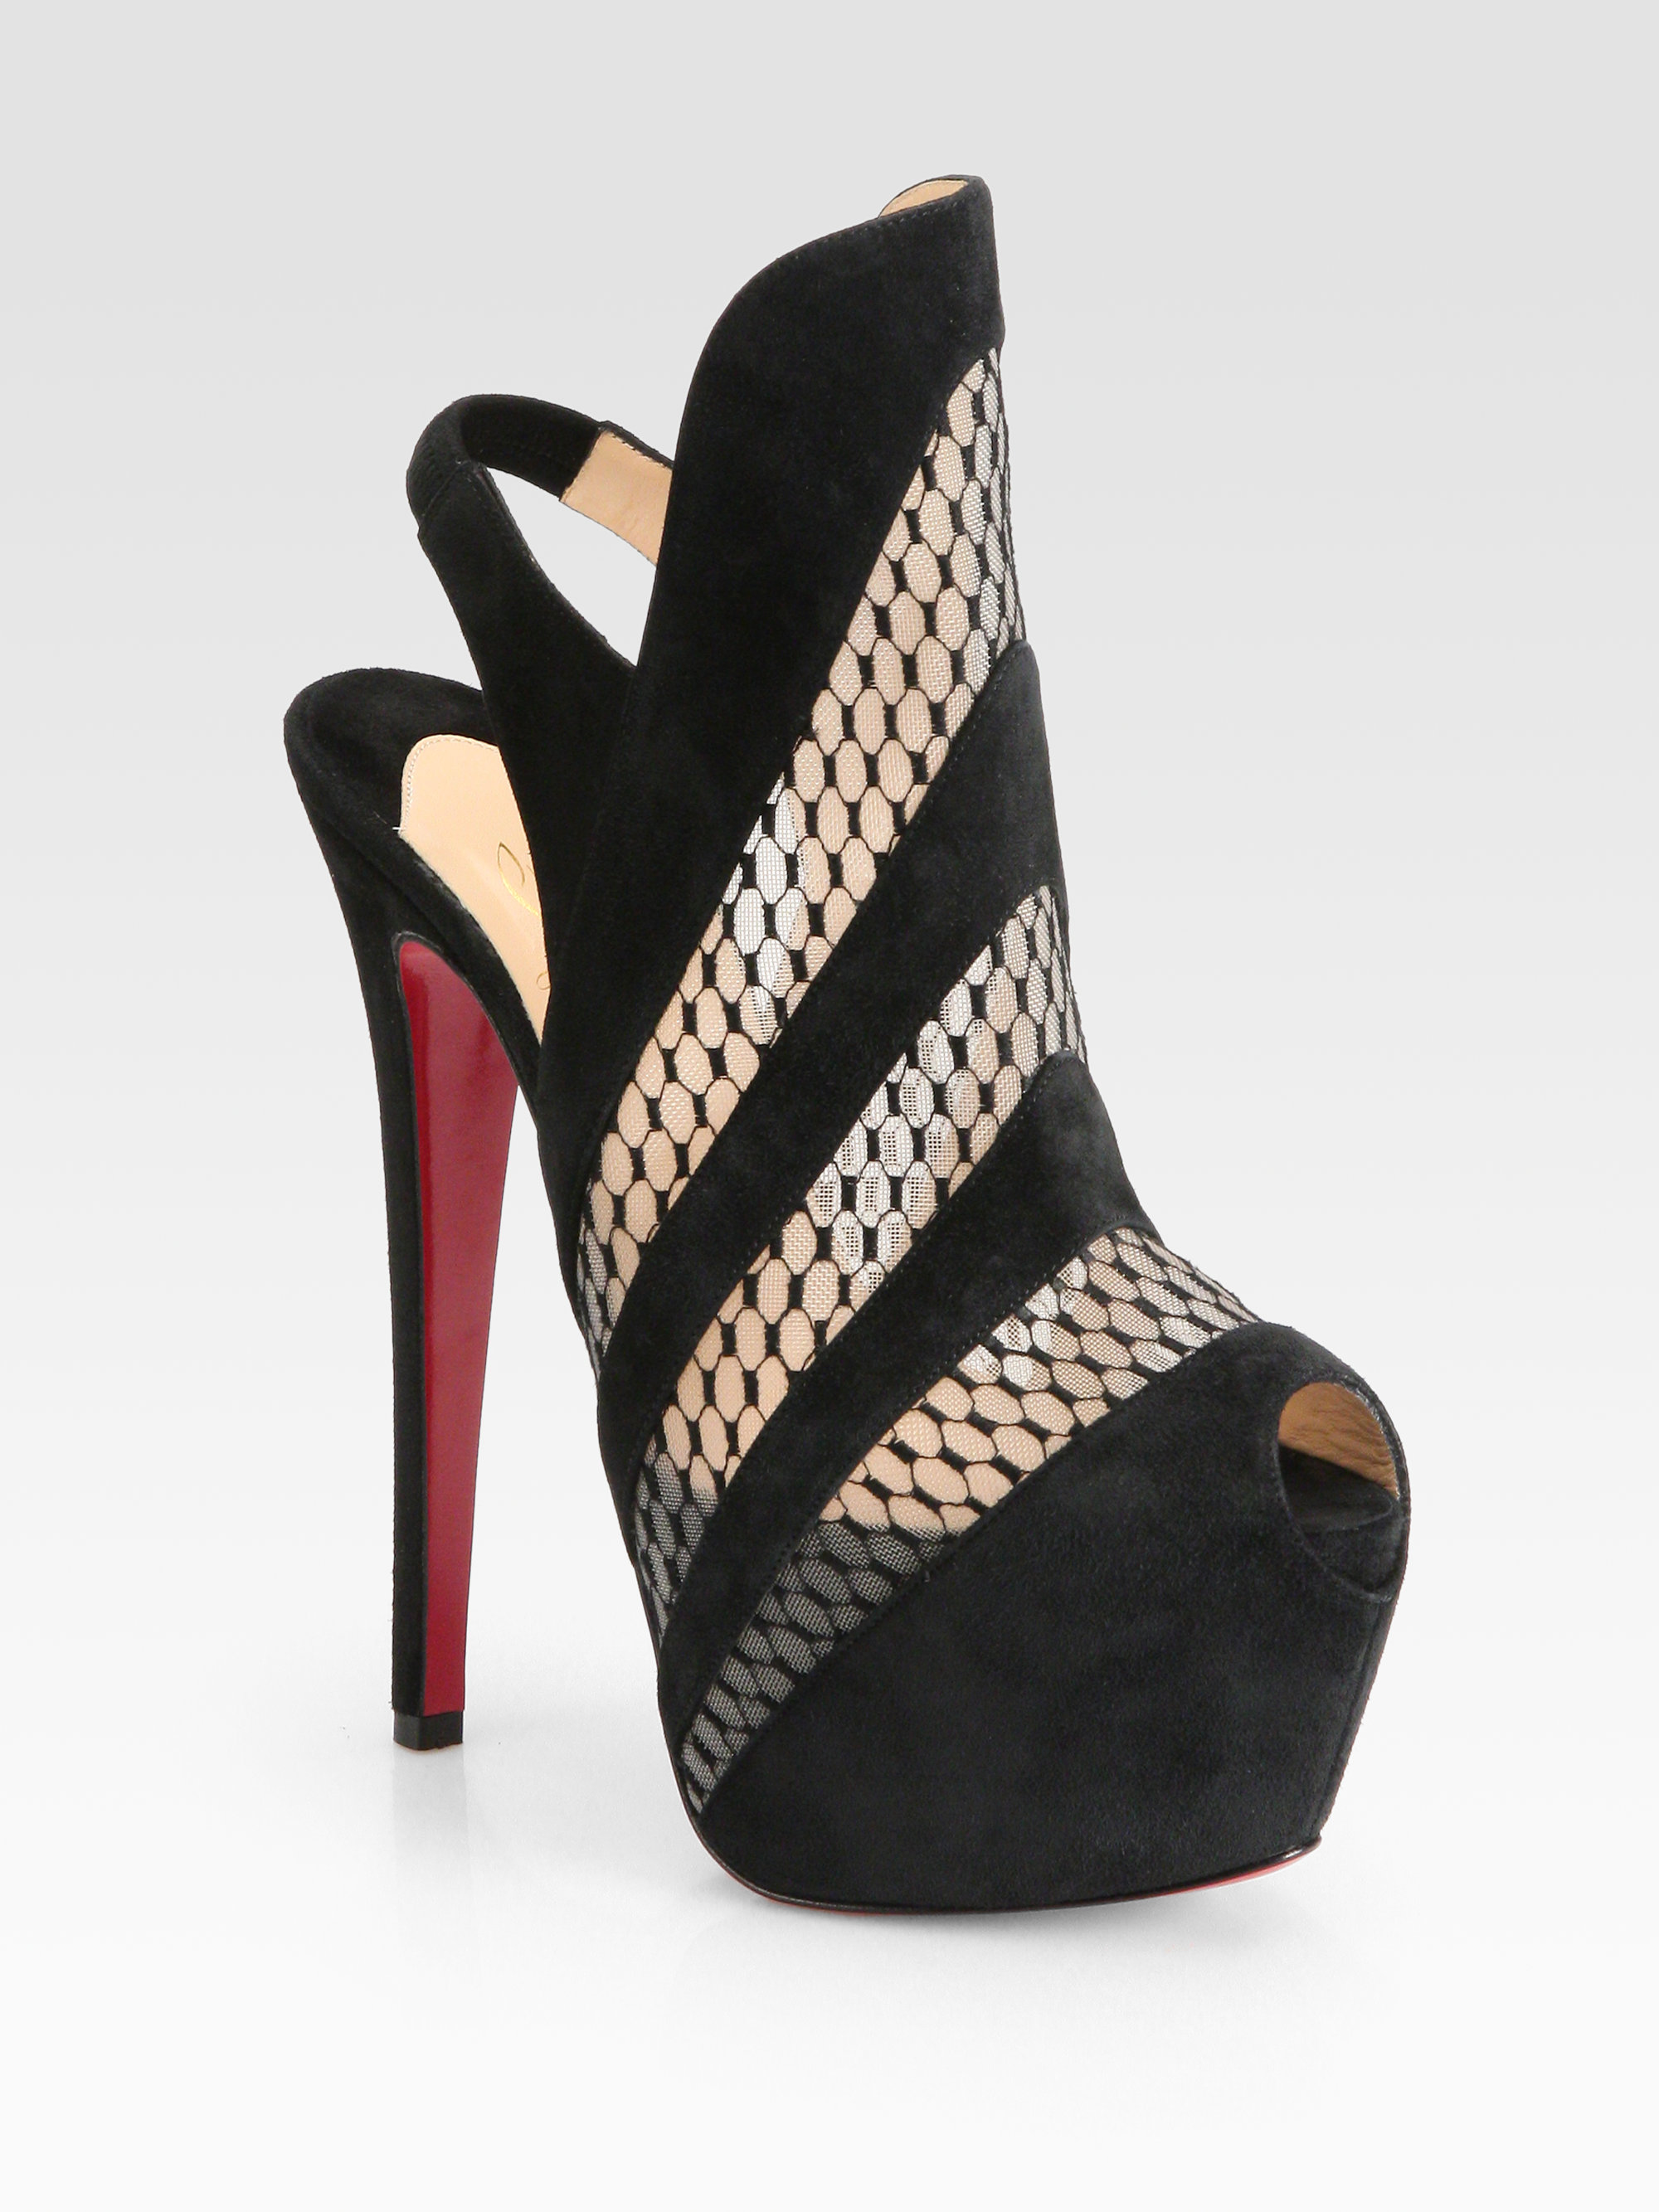 Lyst - Christian Louboutin Guizi Suede Mesh Platform Ankle Boots in Black